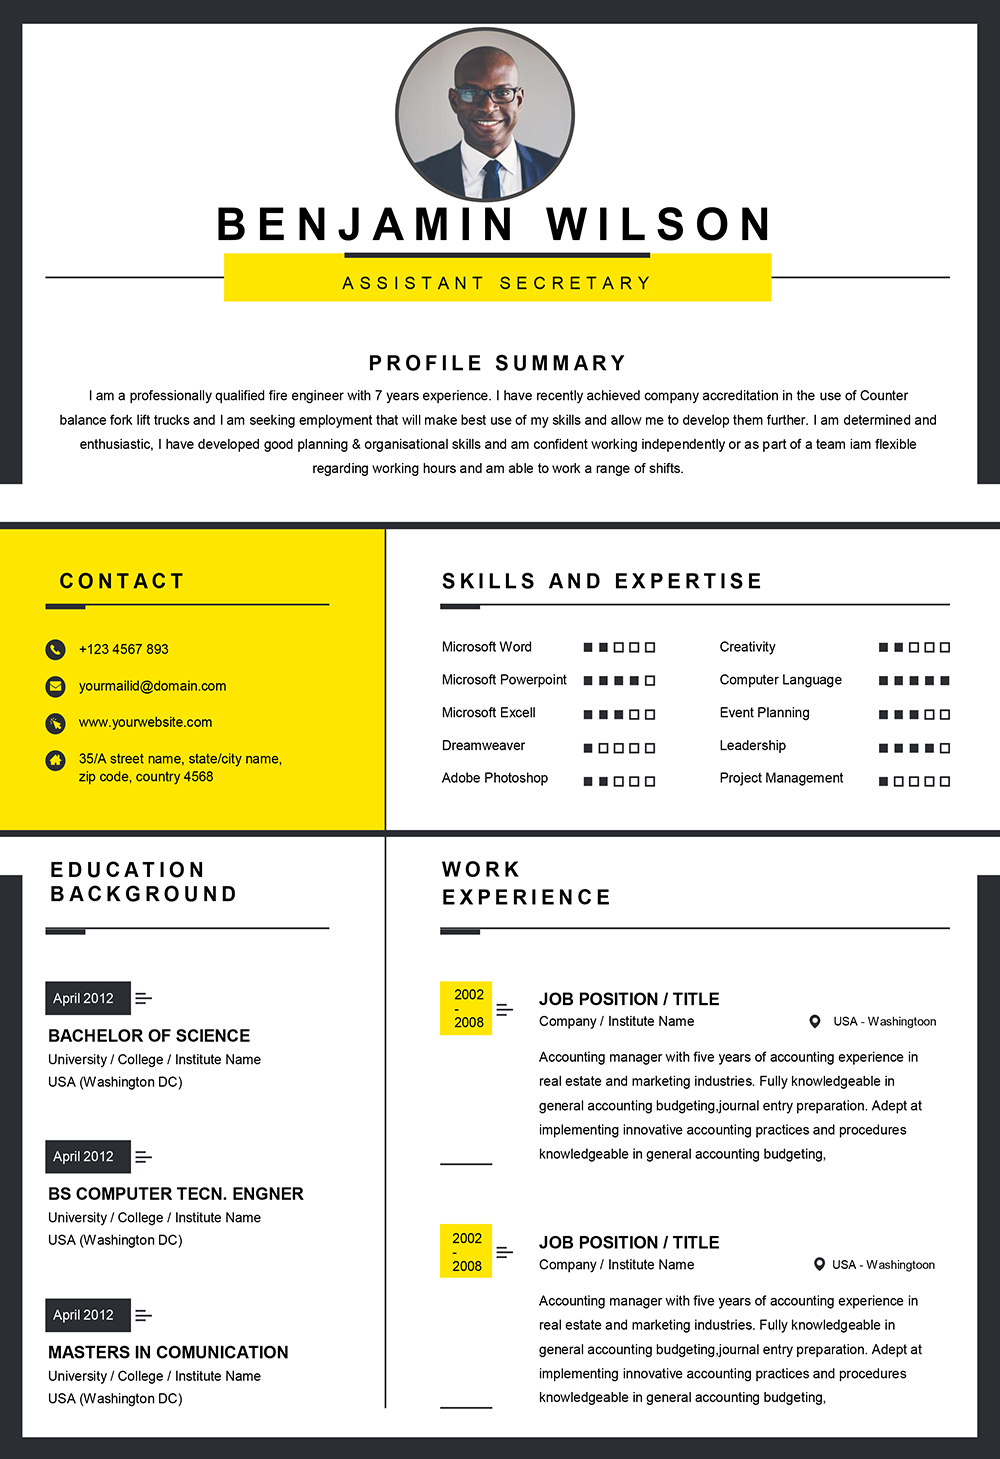 Clean Professional Word Resume Without Subscription | Word CV